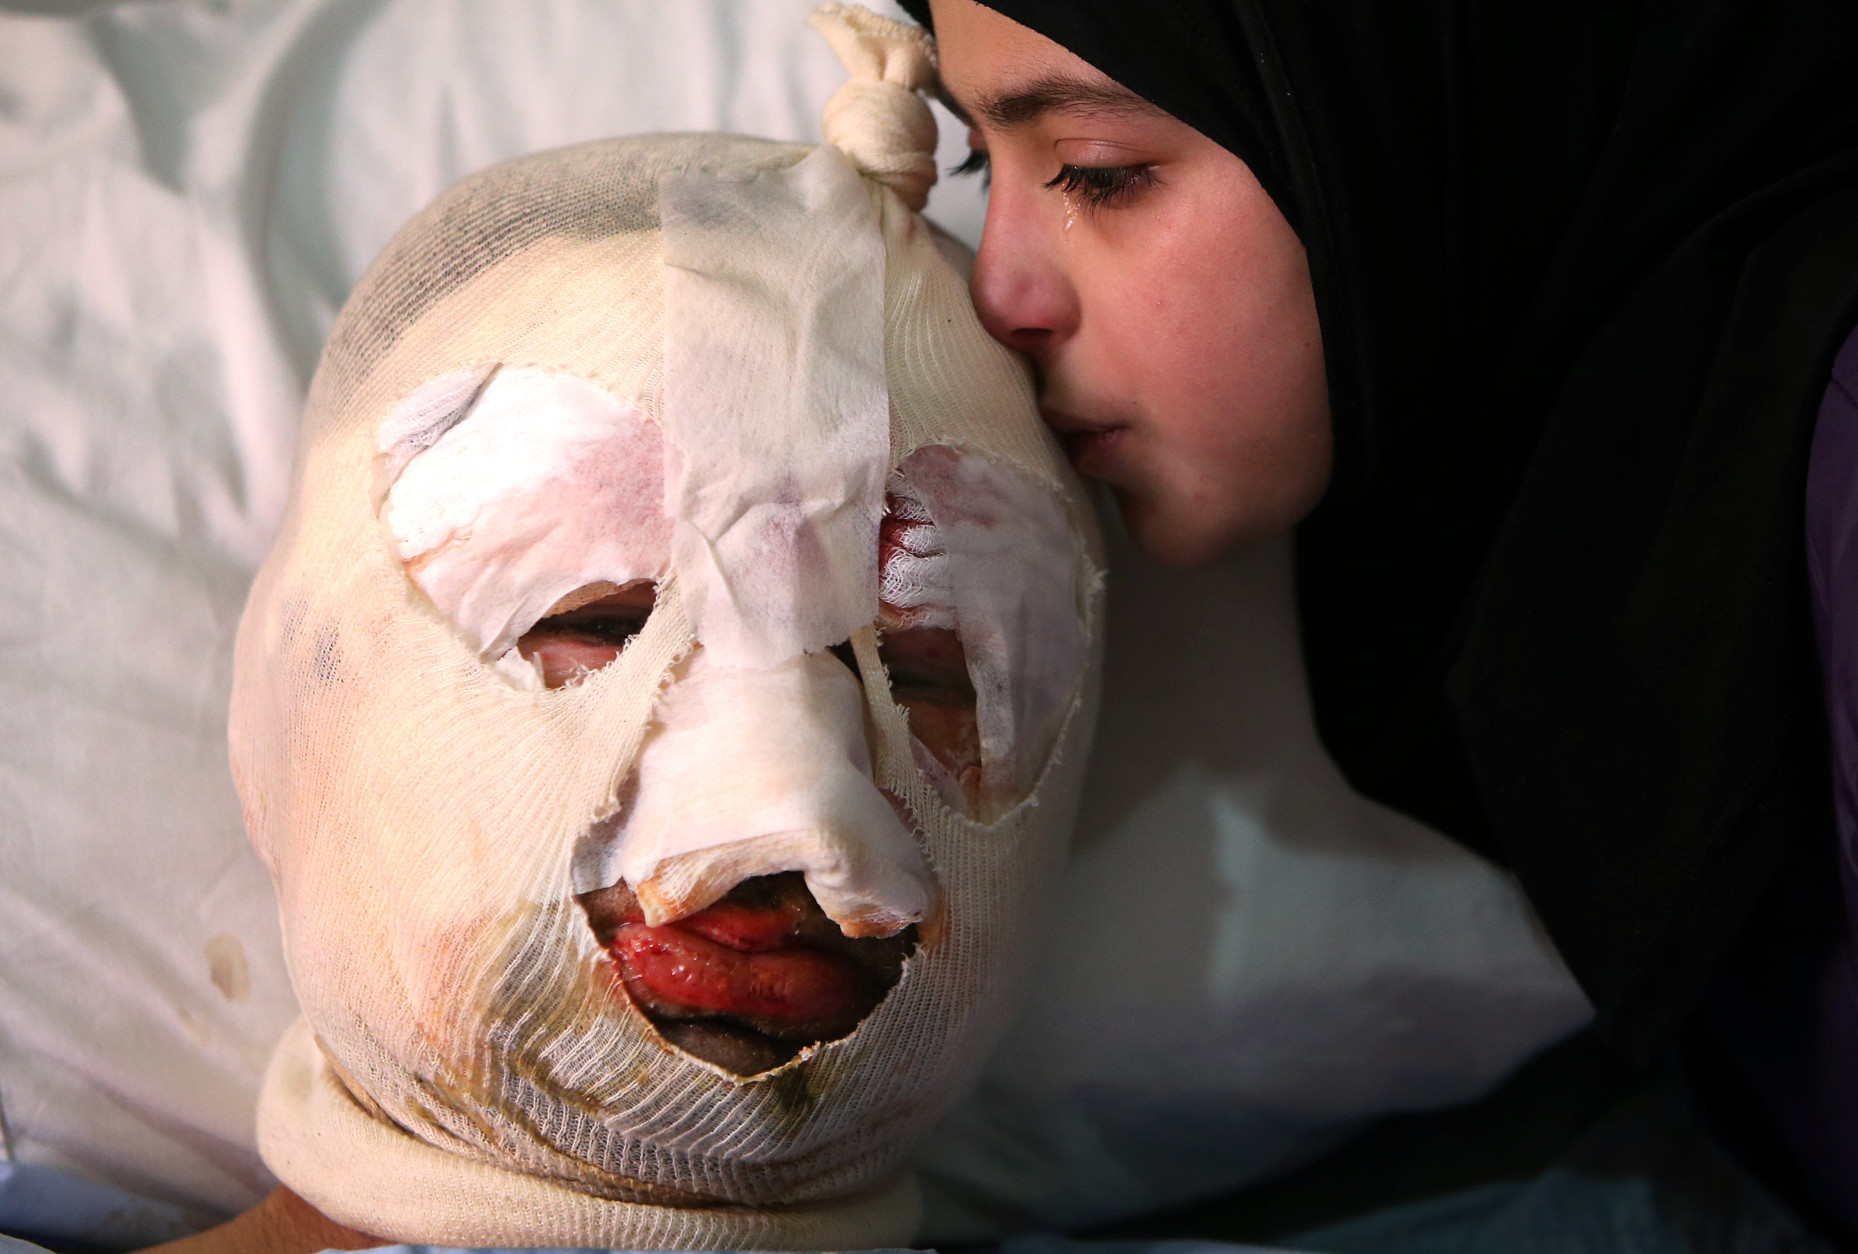 FOR USE AS DESIRED, YEAR END PHOTOS - FILE - Fatima, 13, weeps as she kisses her injured father, Ahmad al-Messmar, 40, who was wounded when a deadly car bomb blew up near a gas station, in the predominately Shiite town of Hermel, about 10 miles (16 kilometers) from the Syrian border in northeast Lebanon, Sunday, Feb. 2, 2014. A shadowy Lebanese Sunni extremist group claimed responsibility for a suicide car bombing in Hermel, a stronghold of Lebanon's militant Hezbollah group, that killed several people in the latest attack linked to the war in neighboring Syria. (AP Photo/Hussein Malla, File)